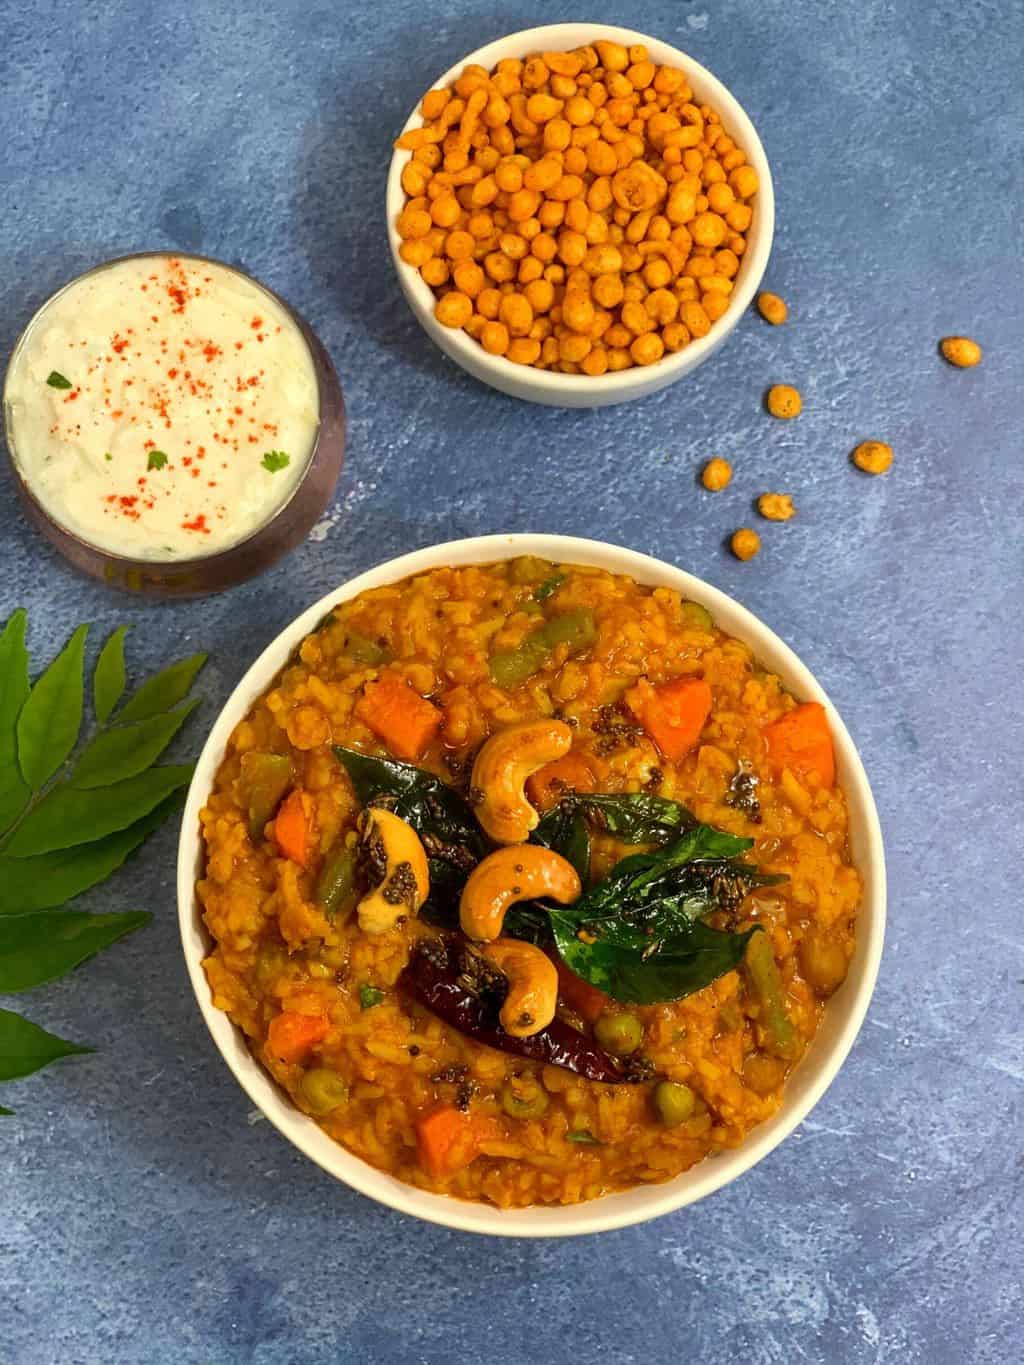 The bisi bele bath is served in a bowl with brew on top and raita and boondi on the side